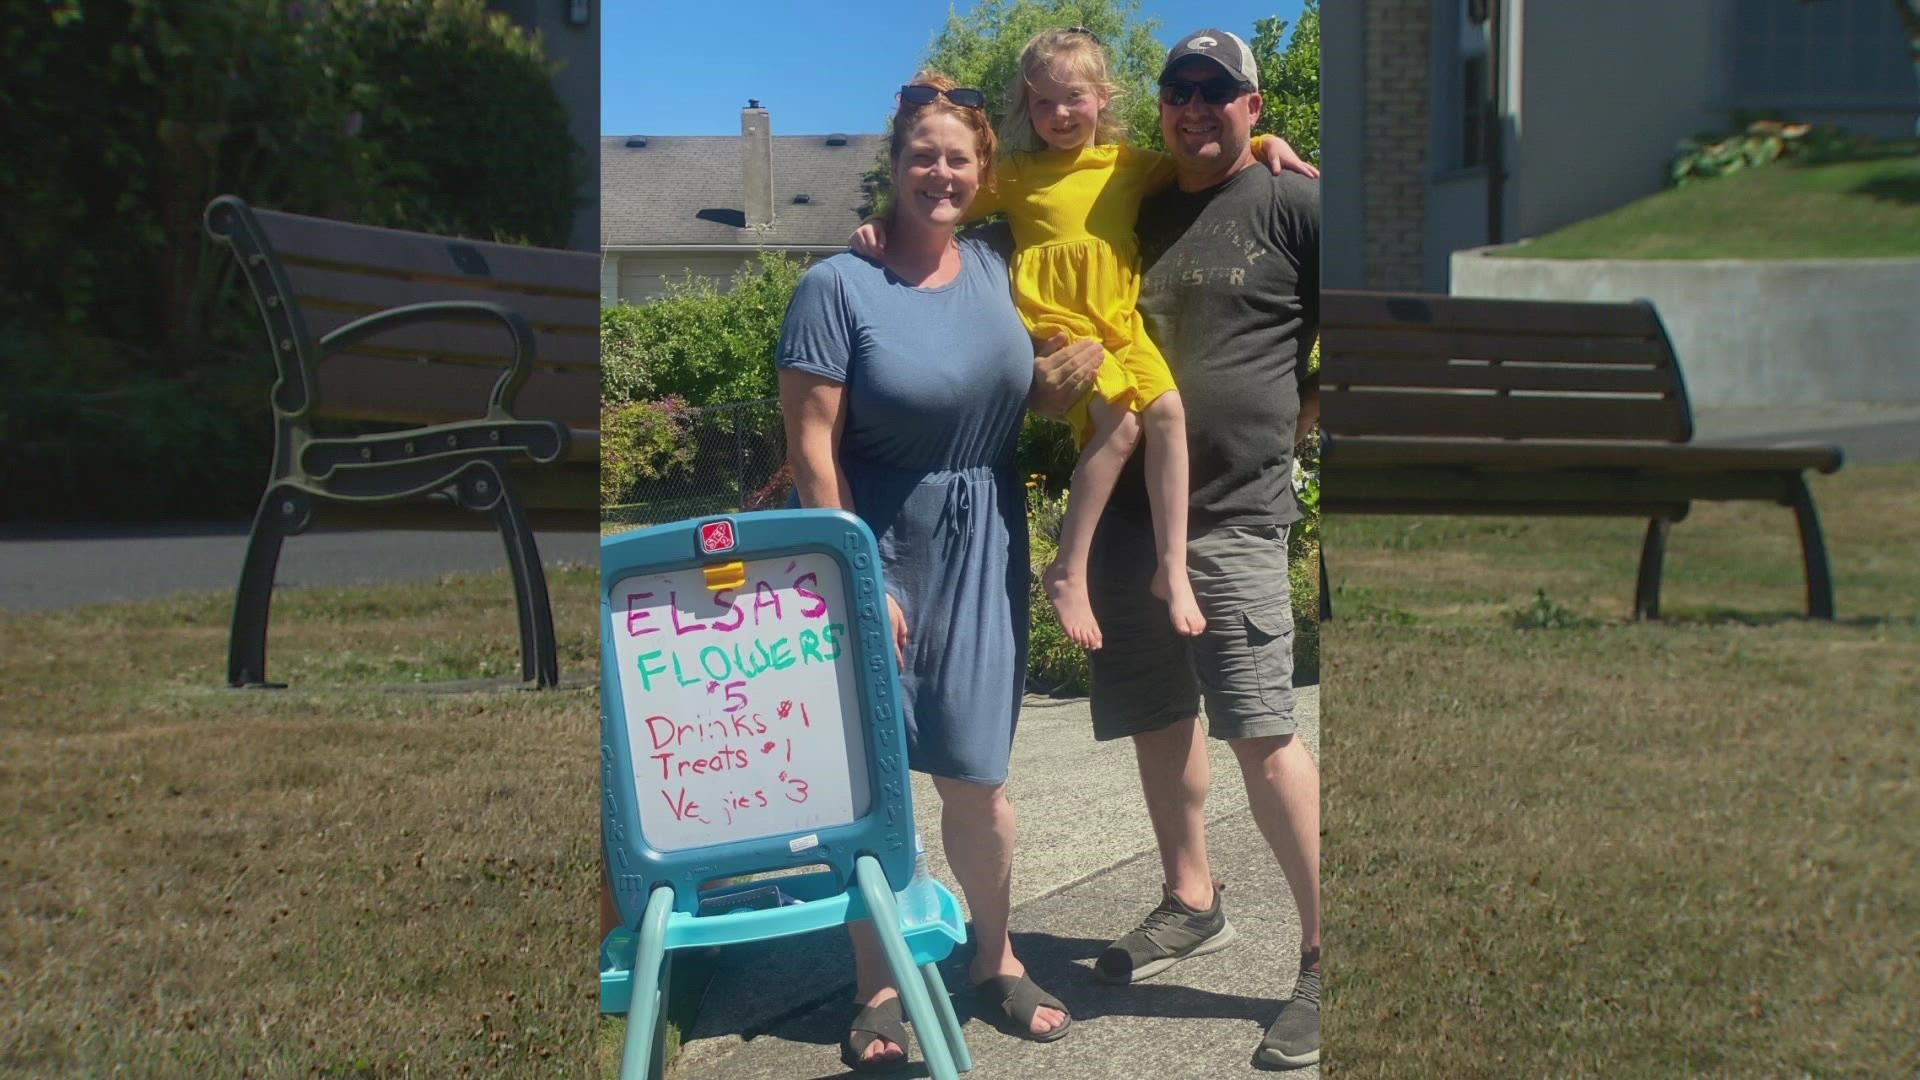 The 7-year-old was told to close up shop and now neighbors are calling out the city for what they see as hypocrisy as a homeless camp nearby poses problems.